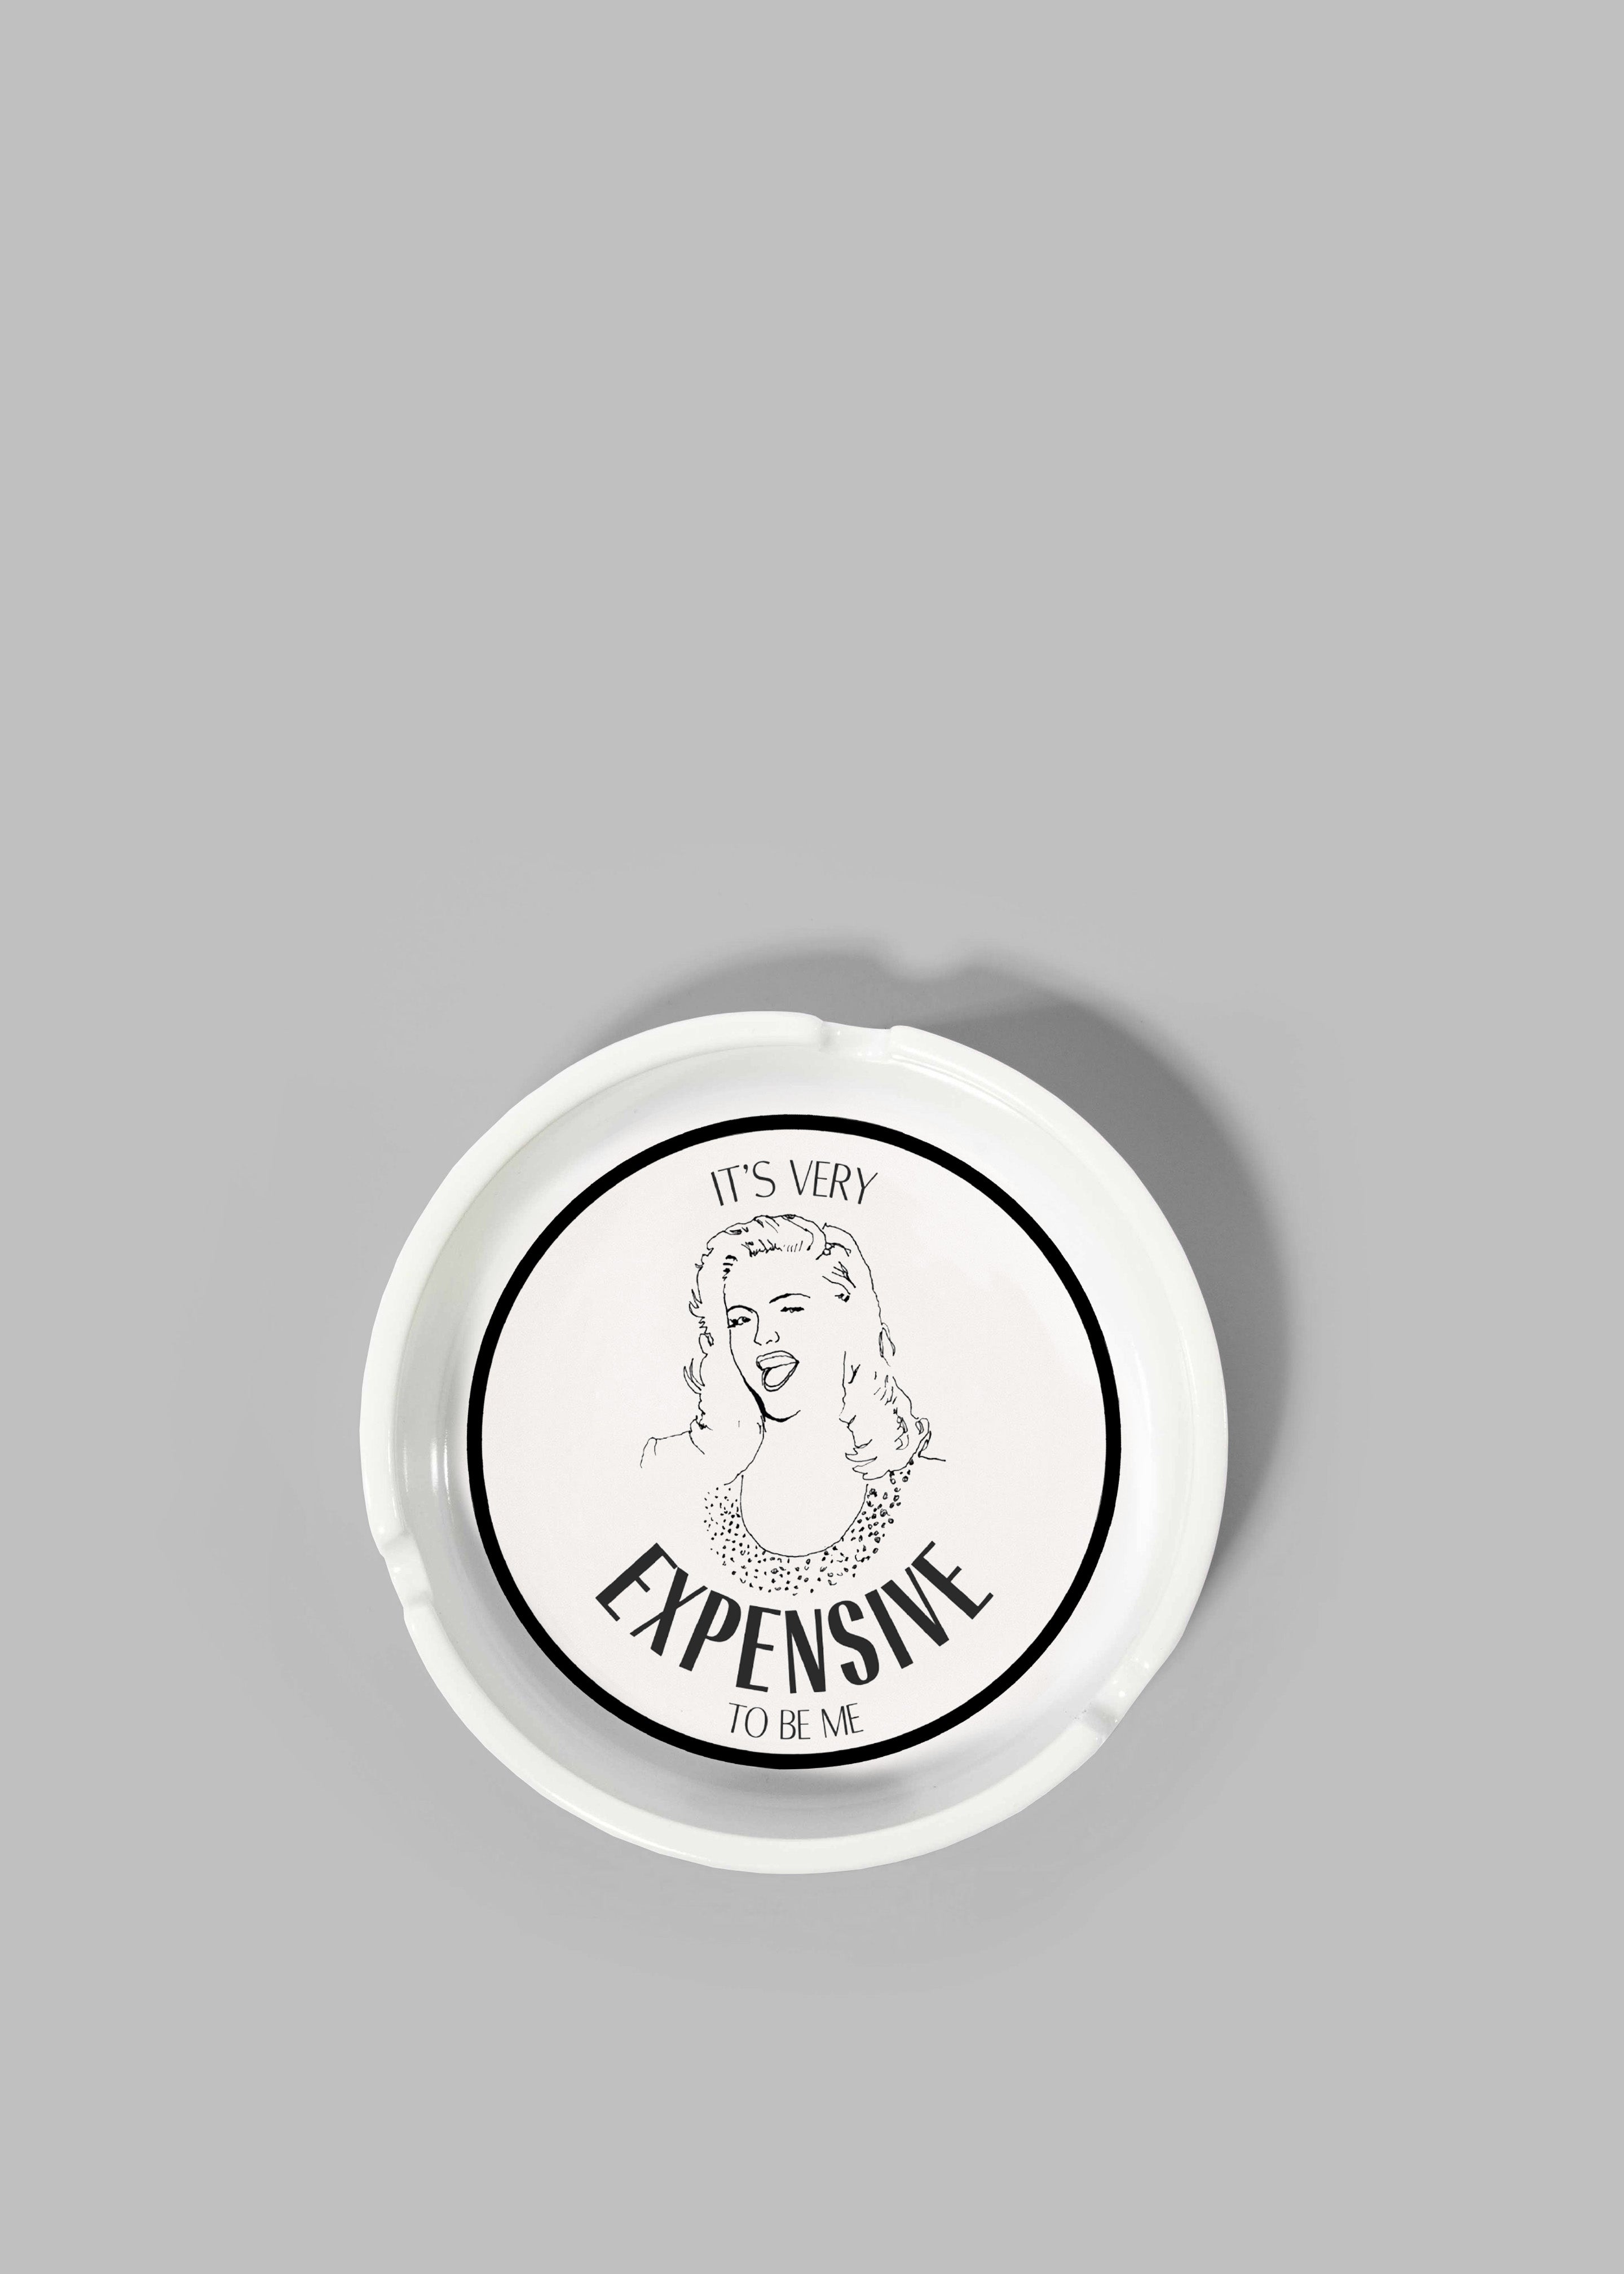 THNK1994 "It's Very Expensive to be Me" Ashtray - White - 1